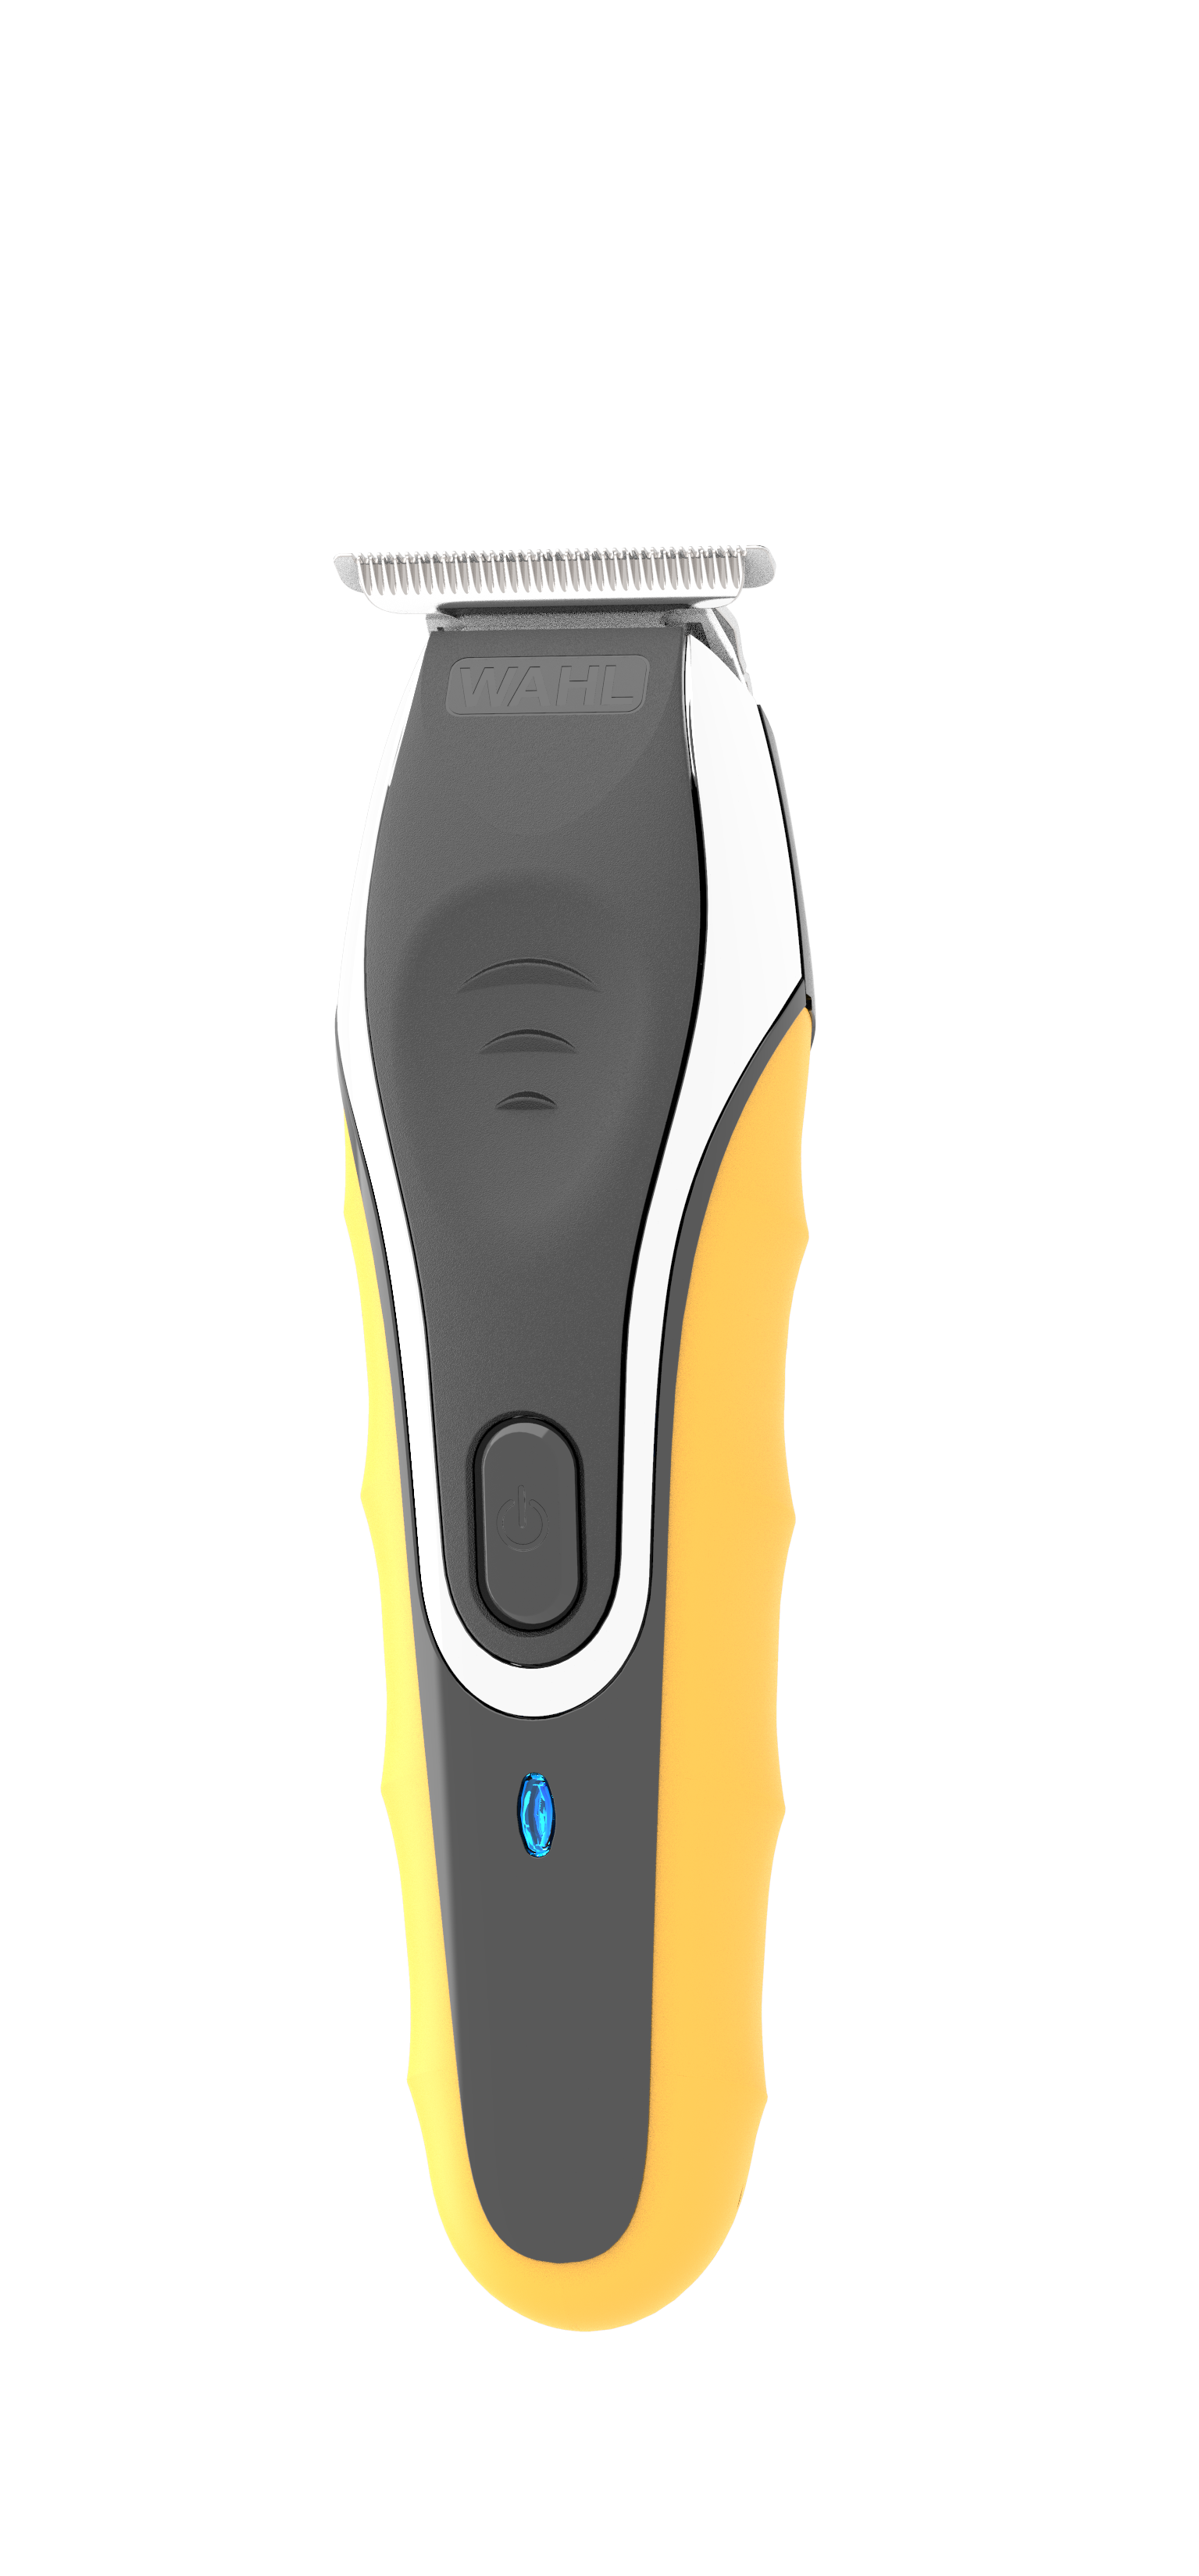 Wahl LifeProof Wet/Dry Rechargeable Lithium Ion Trimmer for Men,  Black/Yellow, 9899 | Trimmer